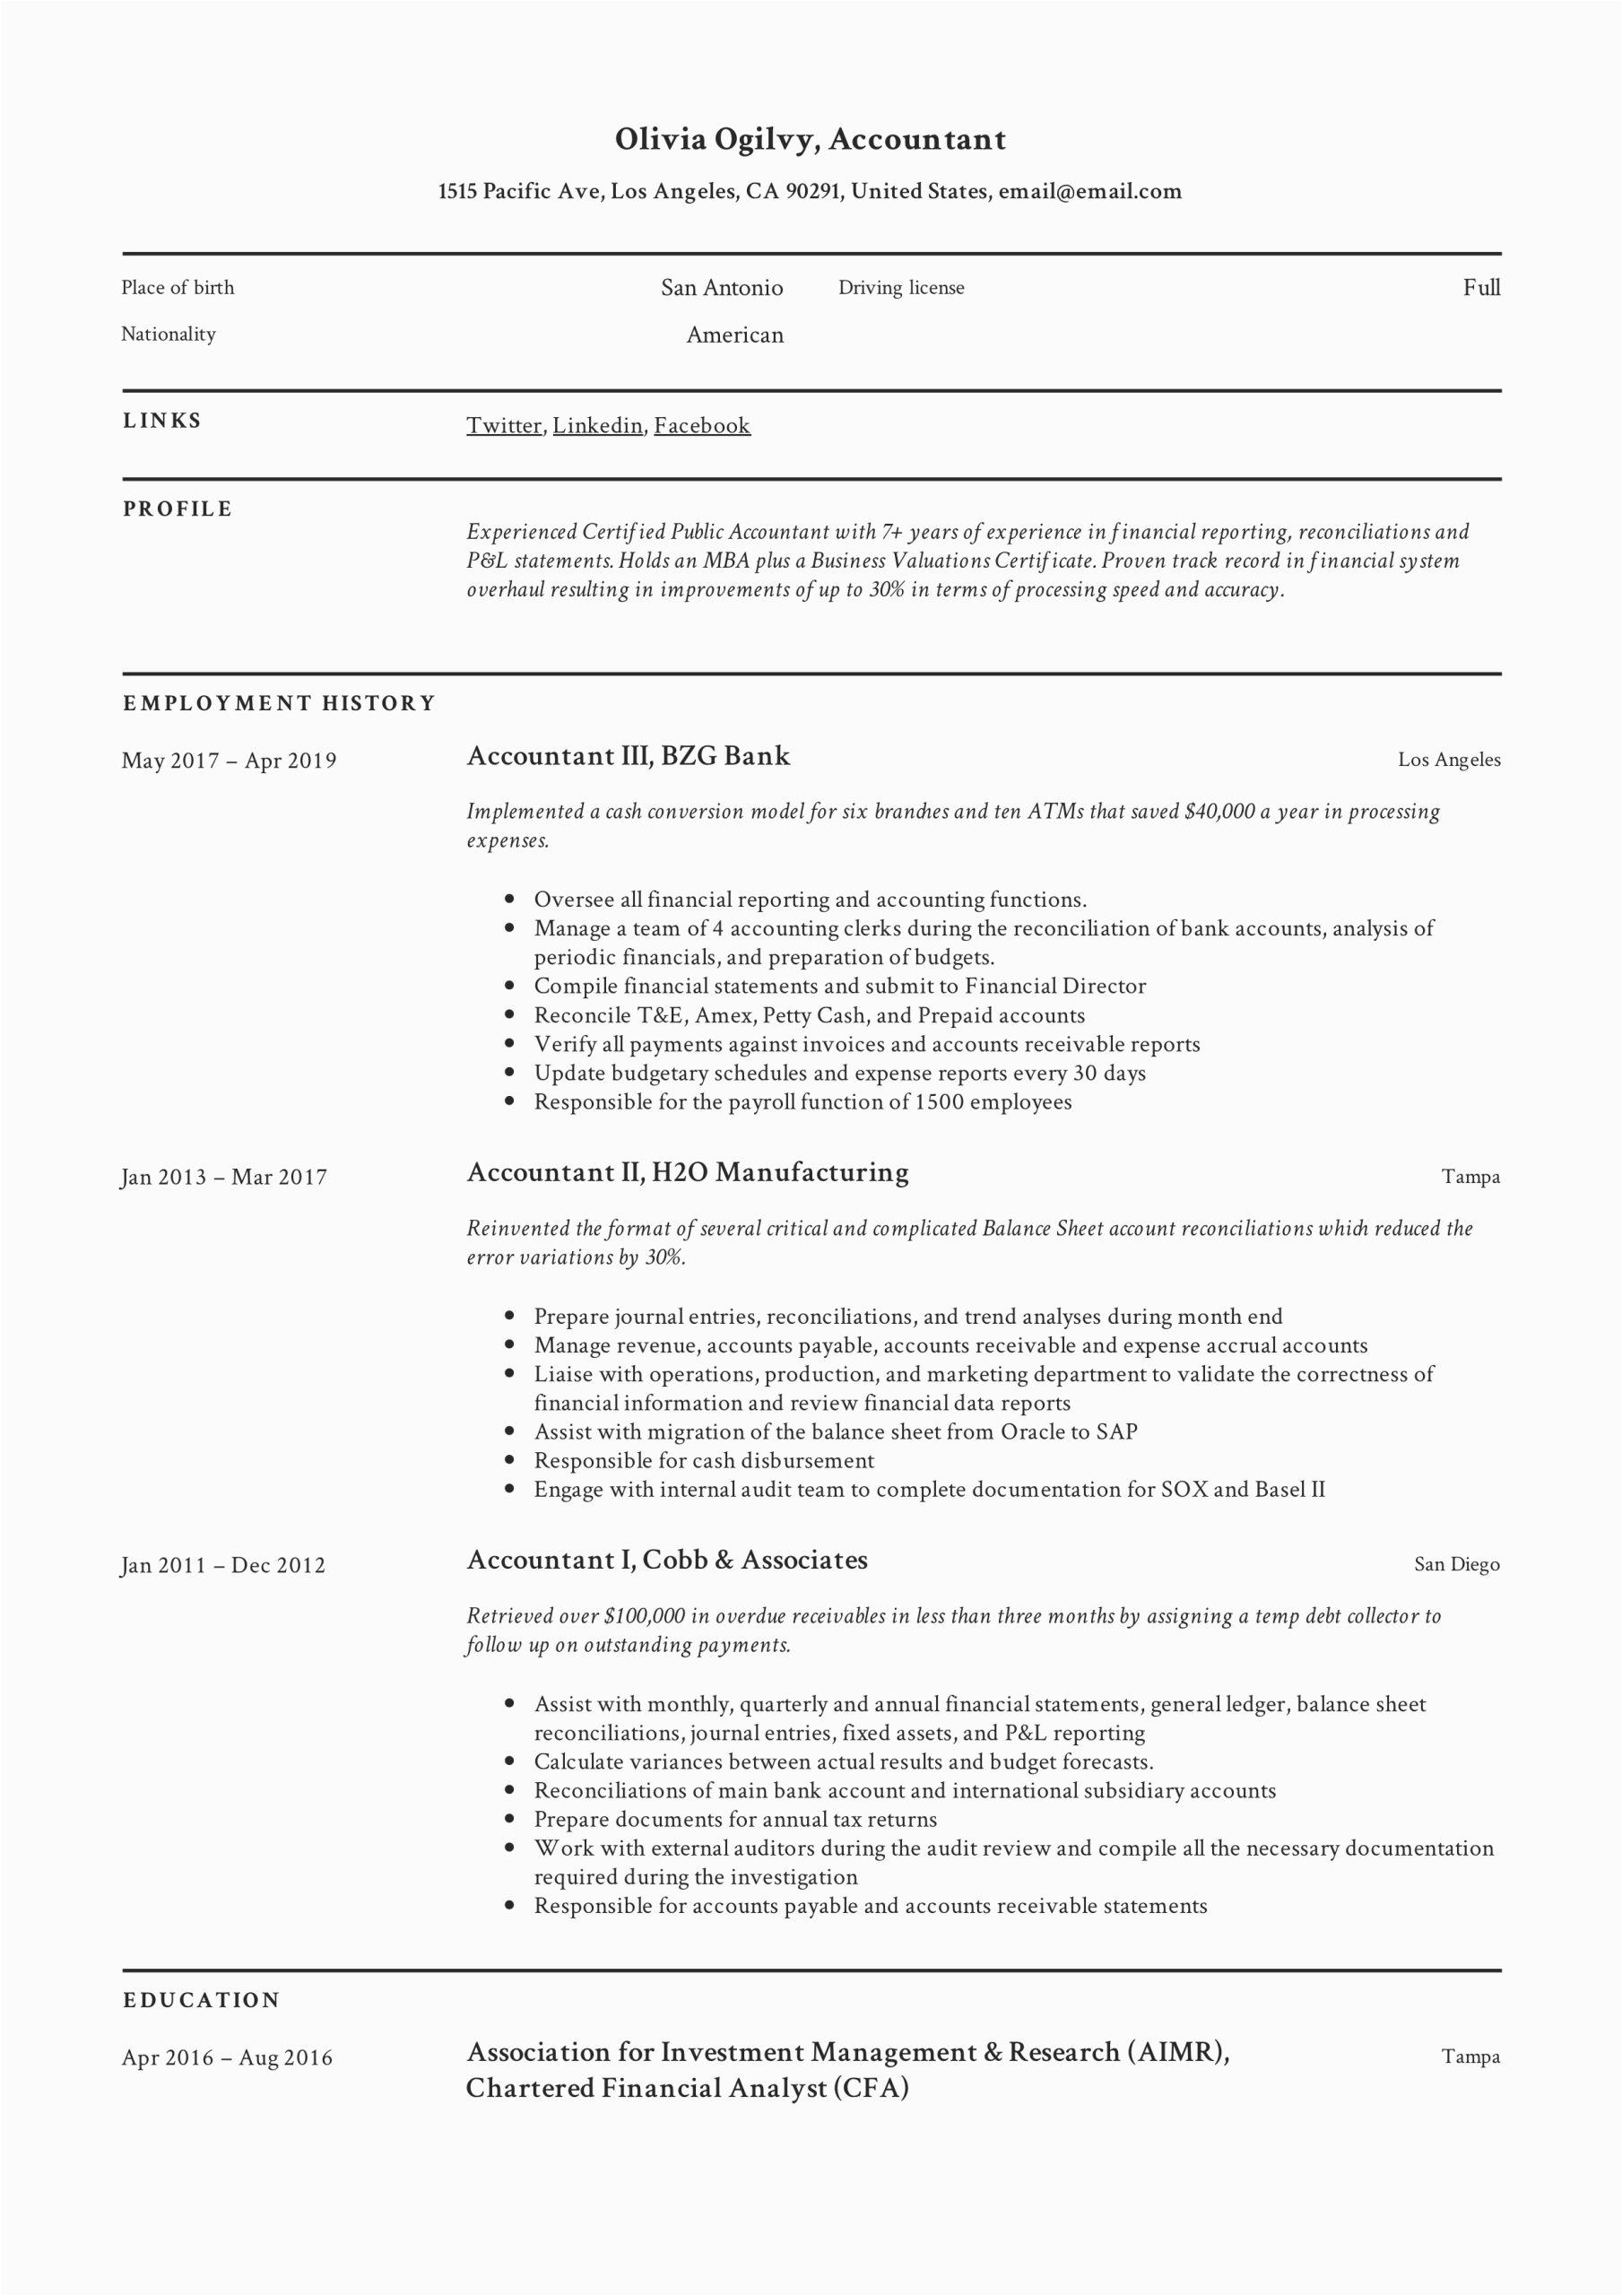 Resume Samples for Us Accounting Jobs Accountant Resume & Writing Guide 12 Resume Templates